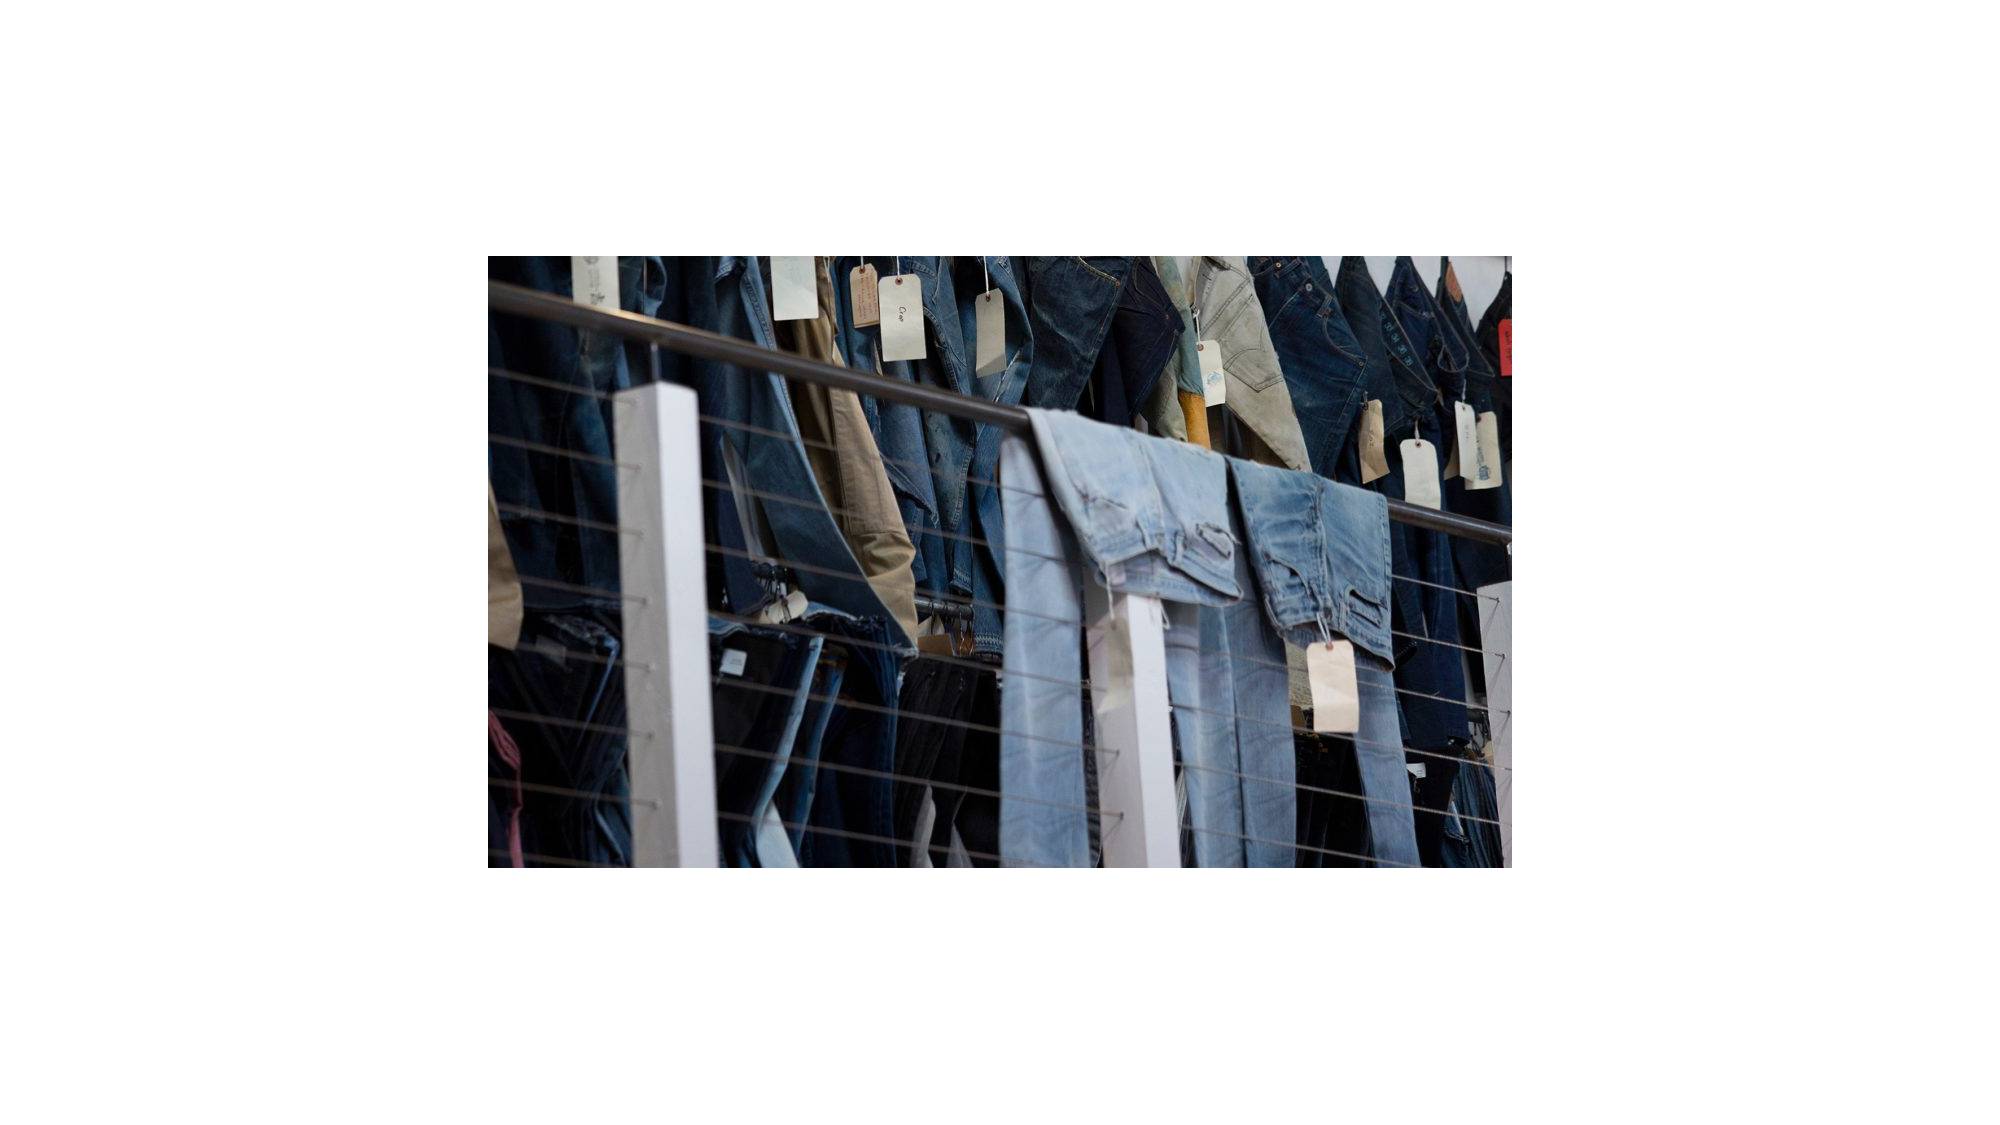 jeans hanging over railing with tags